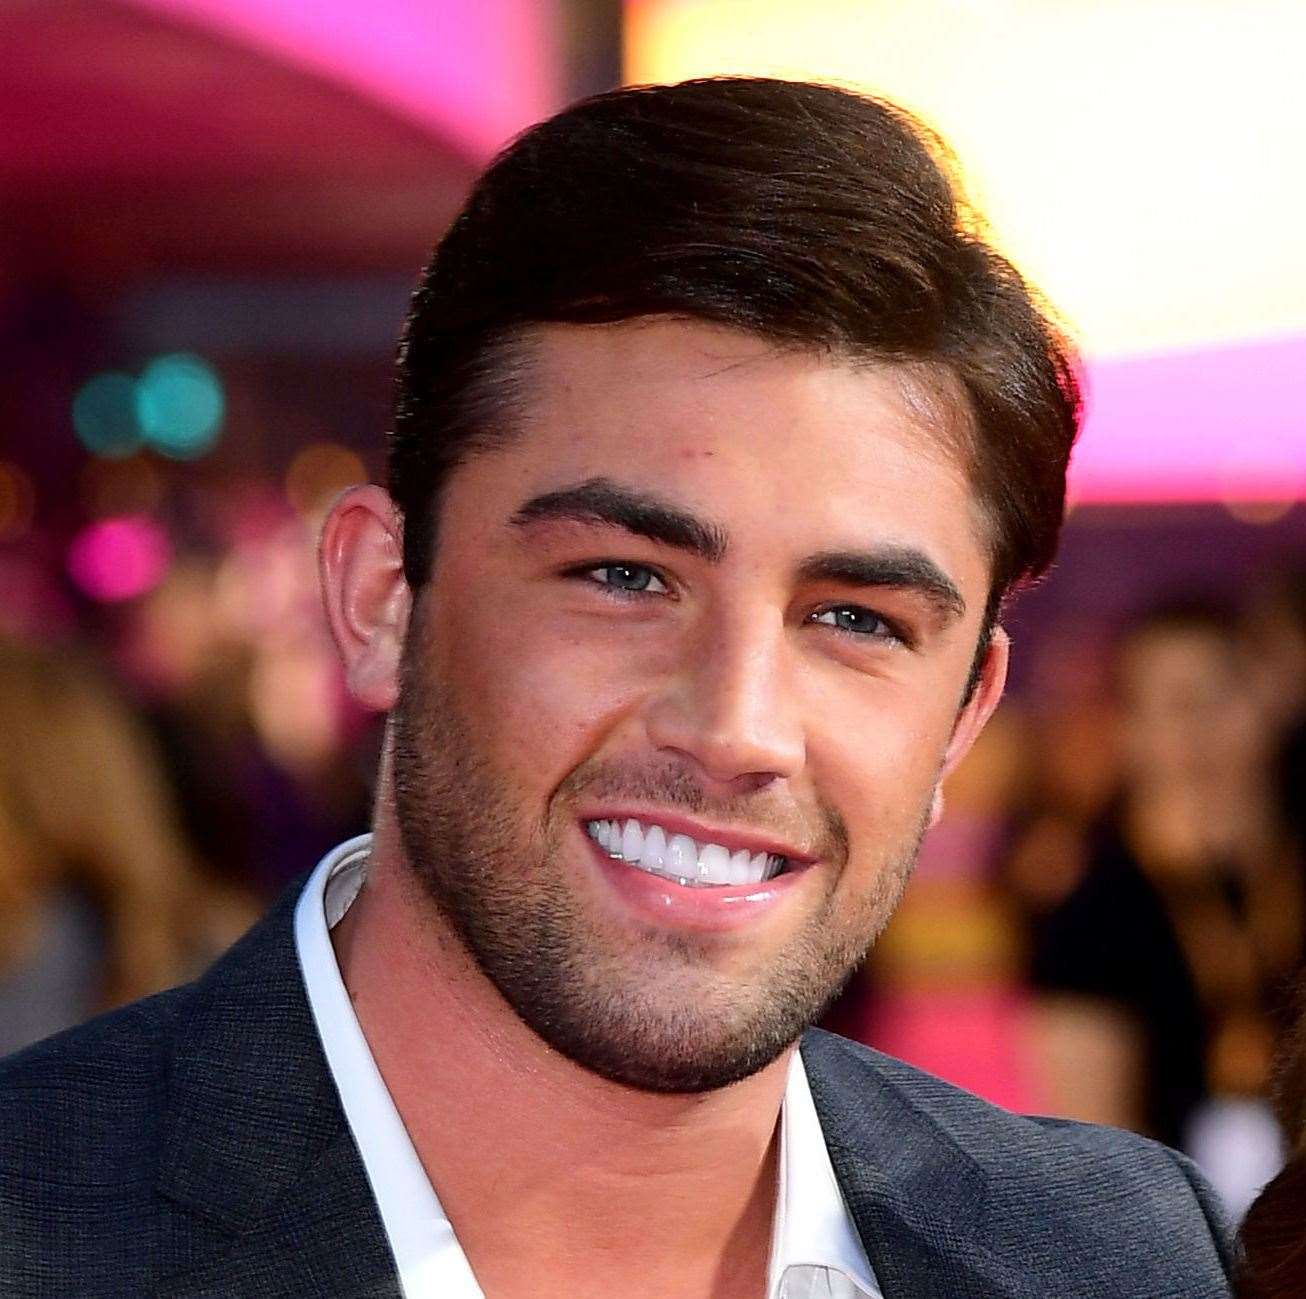 Love Island winner Jack Fincham is due to appear in court accused of driving after taking cocaine and valium. Picture: Ian West/PA